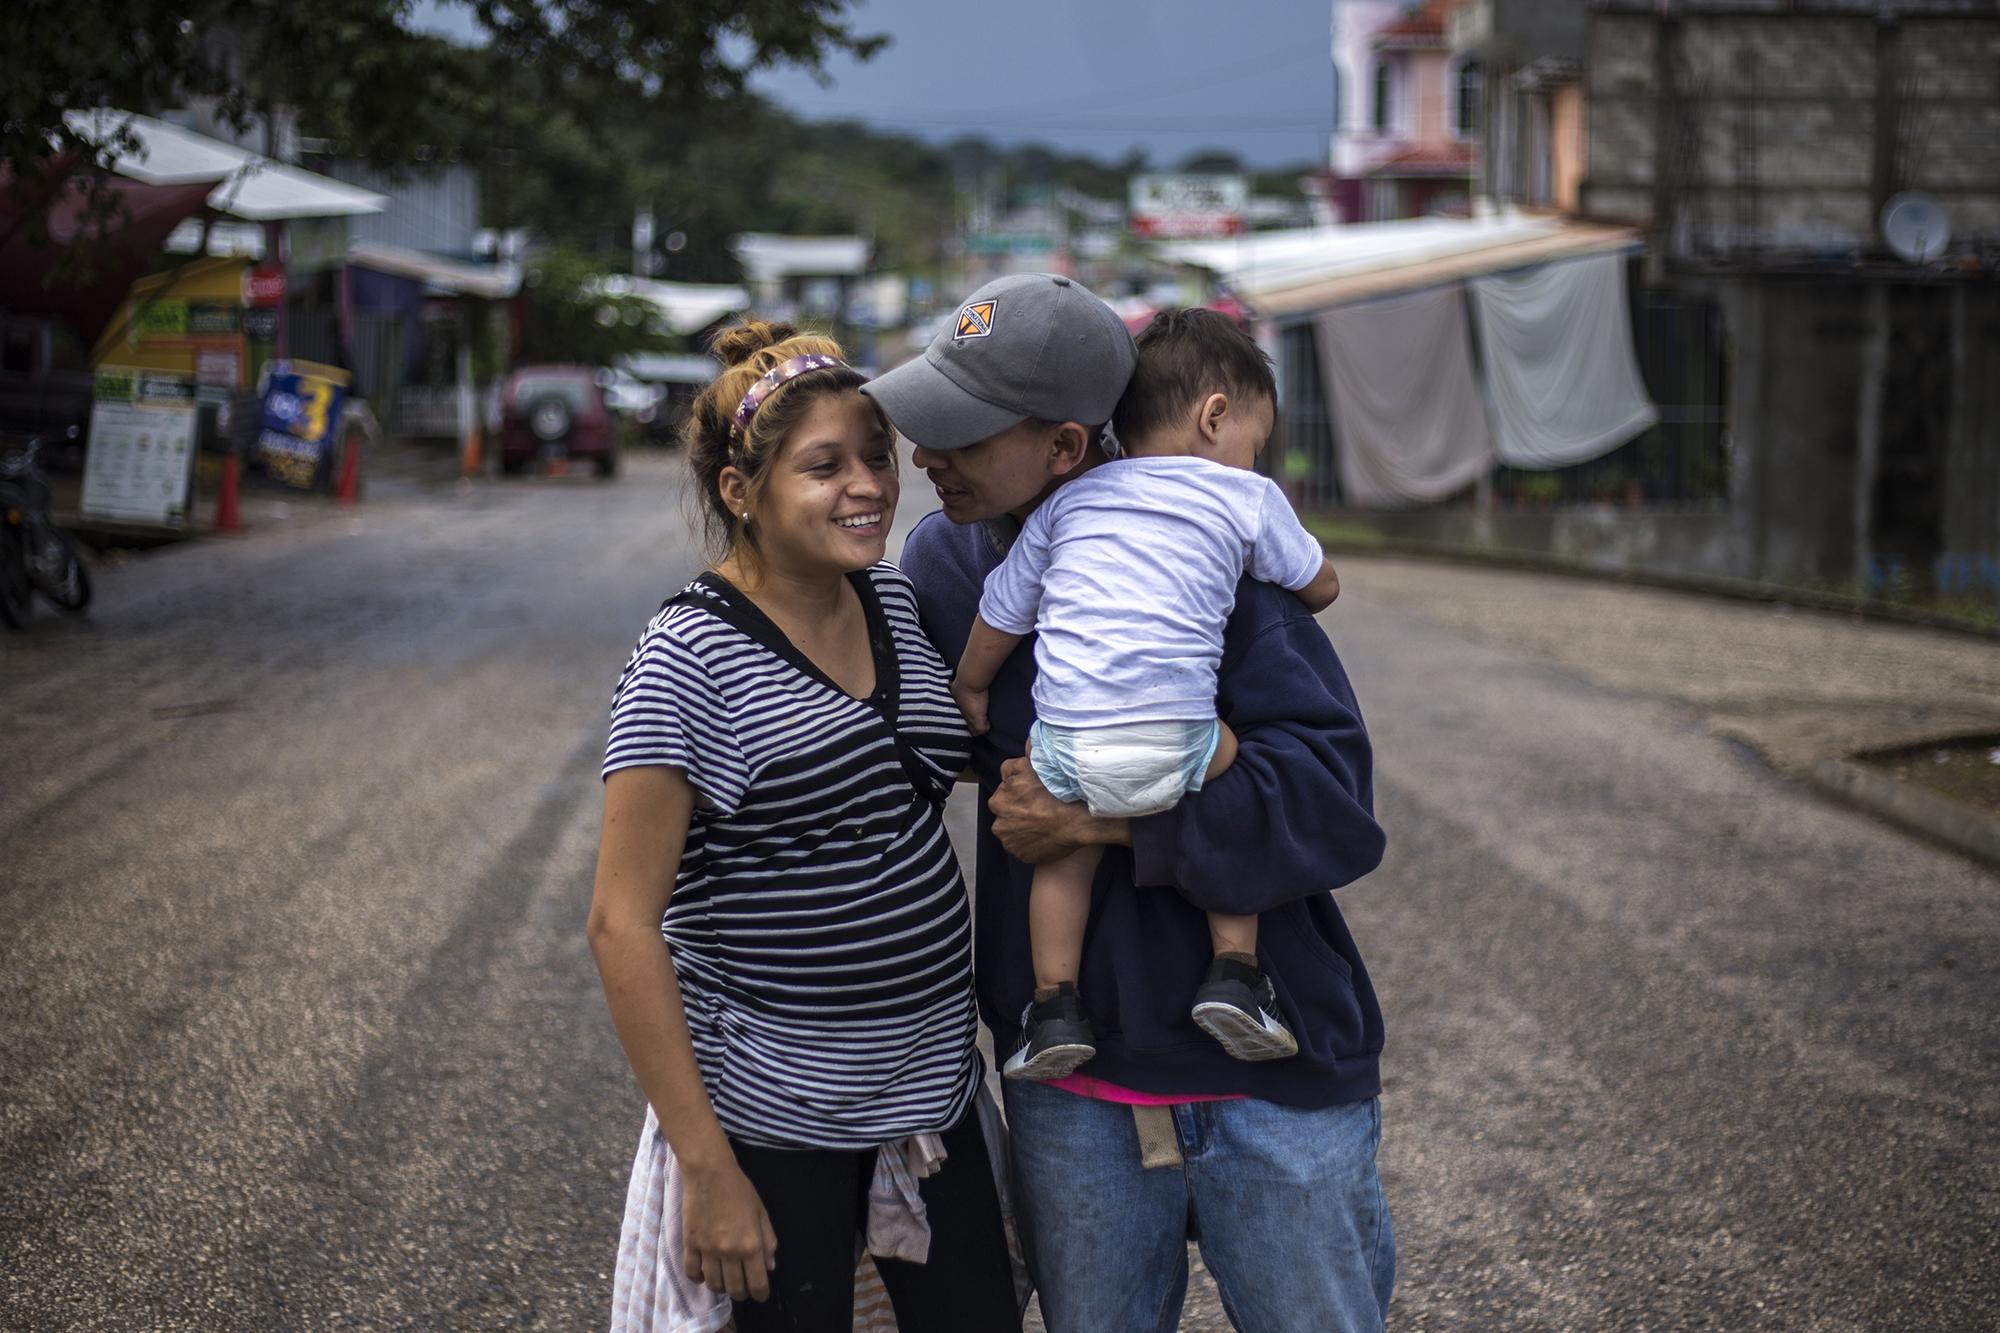 Katheryn and Óscar sold all they had and fled San Pedro Sula. She’s 17. He, 19, carries their one-year-old son. Katheryn is pregnant again. Photo by Víctor Peña.